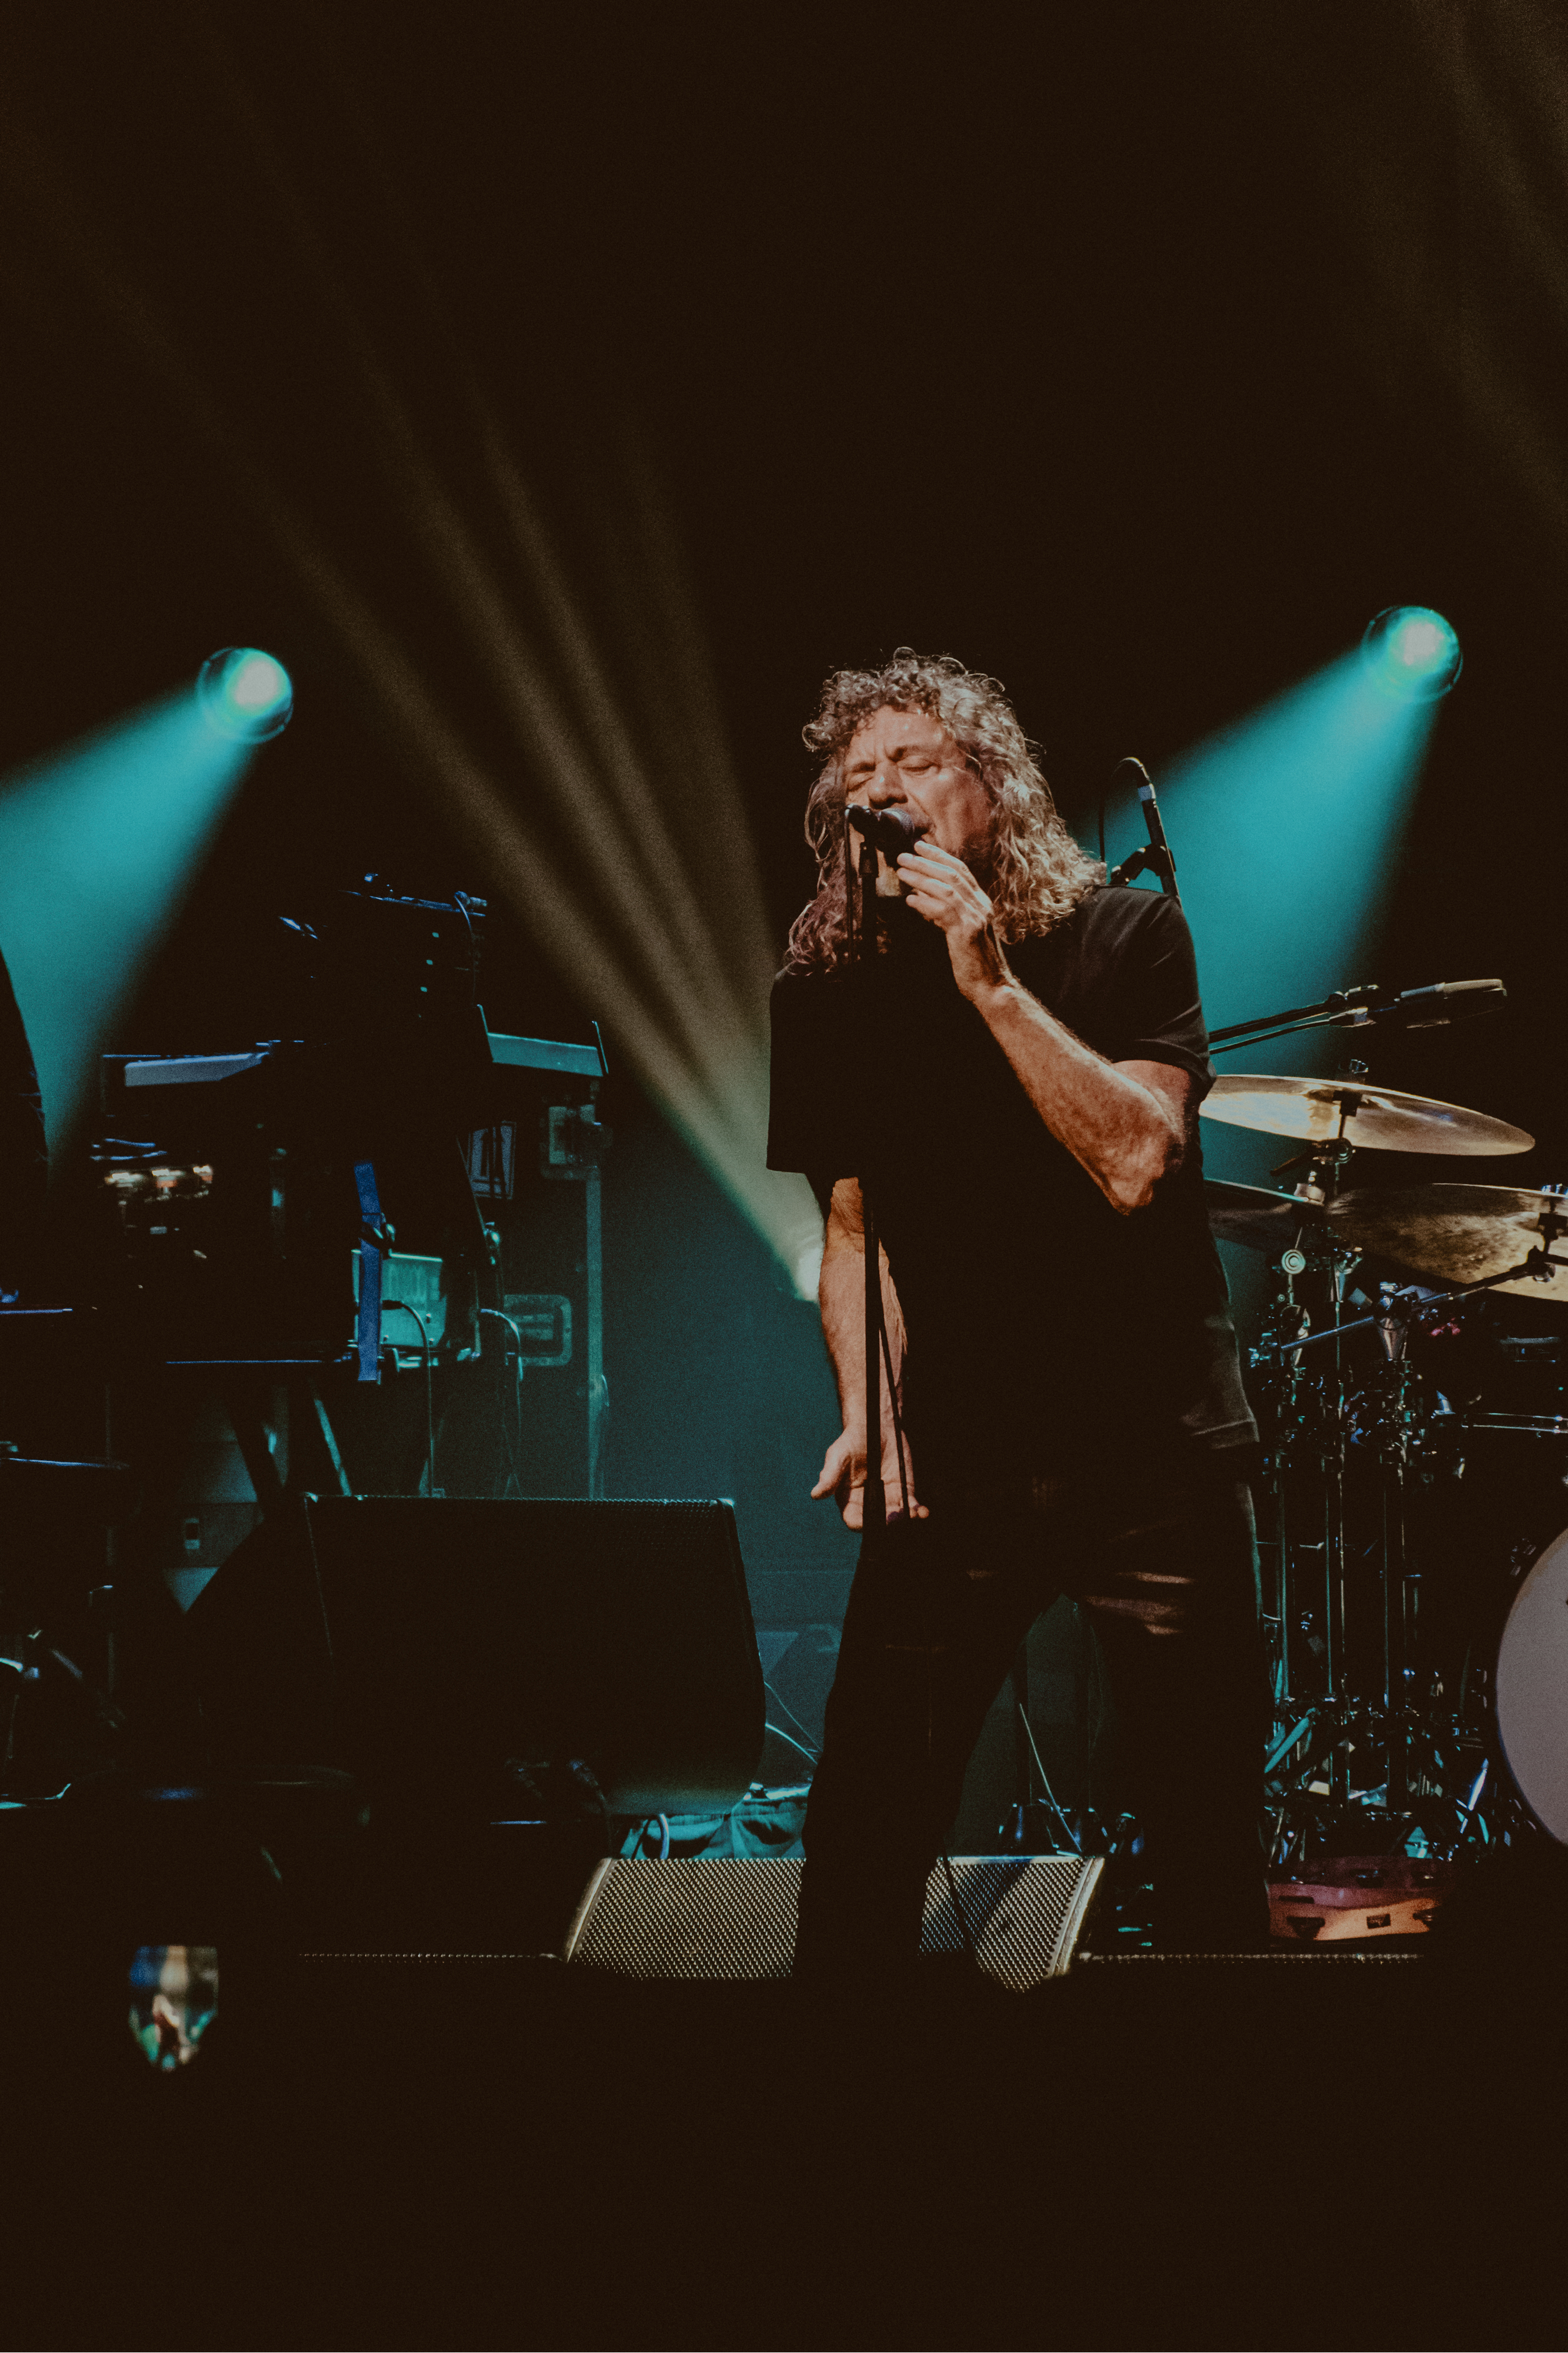 PHOTO: Robert Plant performing at the Moody Theater in Austin, TX Oct. 1. Photo by The Signal reporter Regan Bjerkeli.